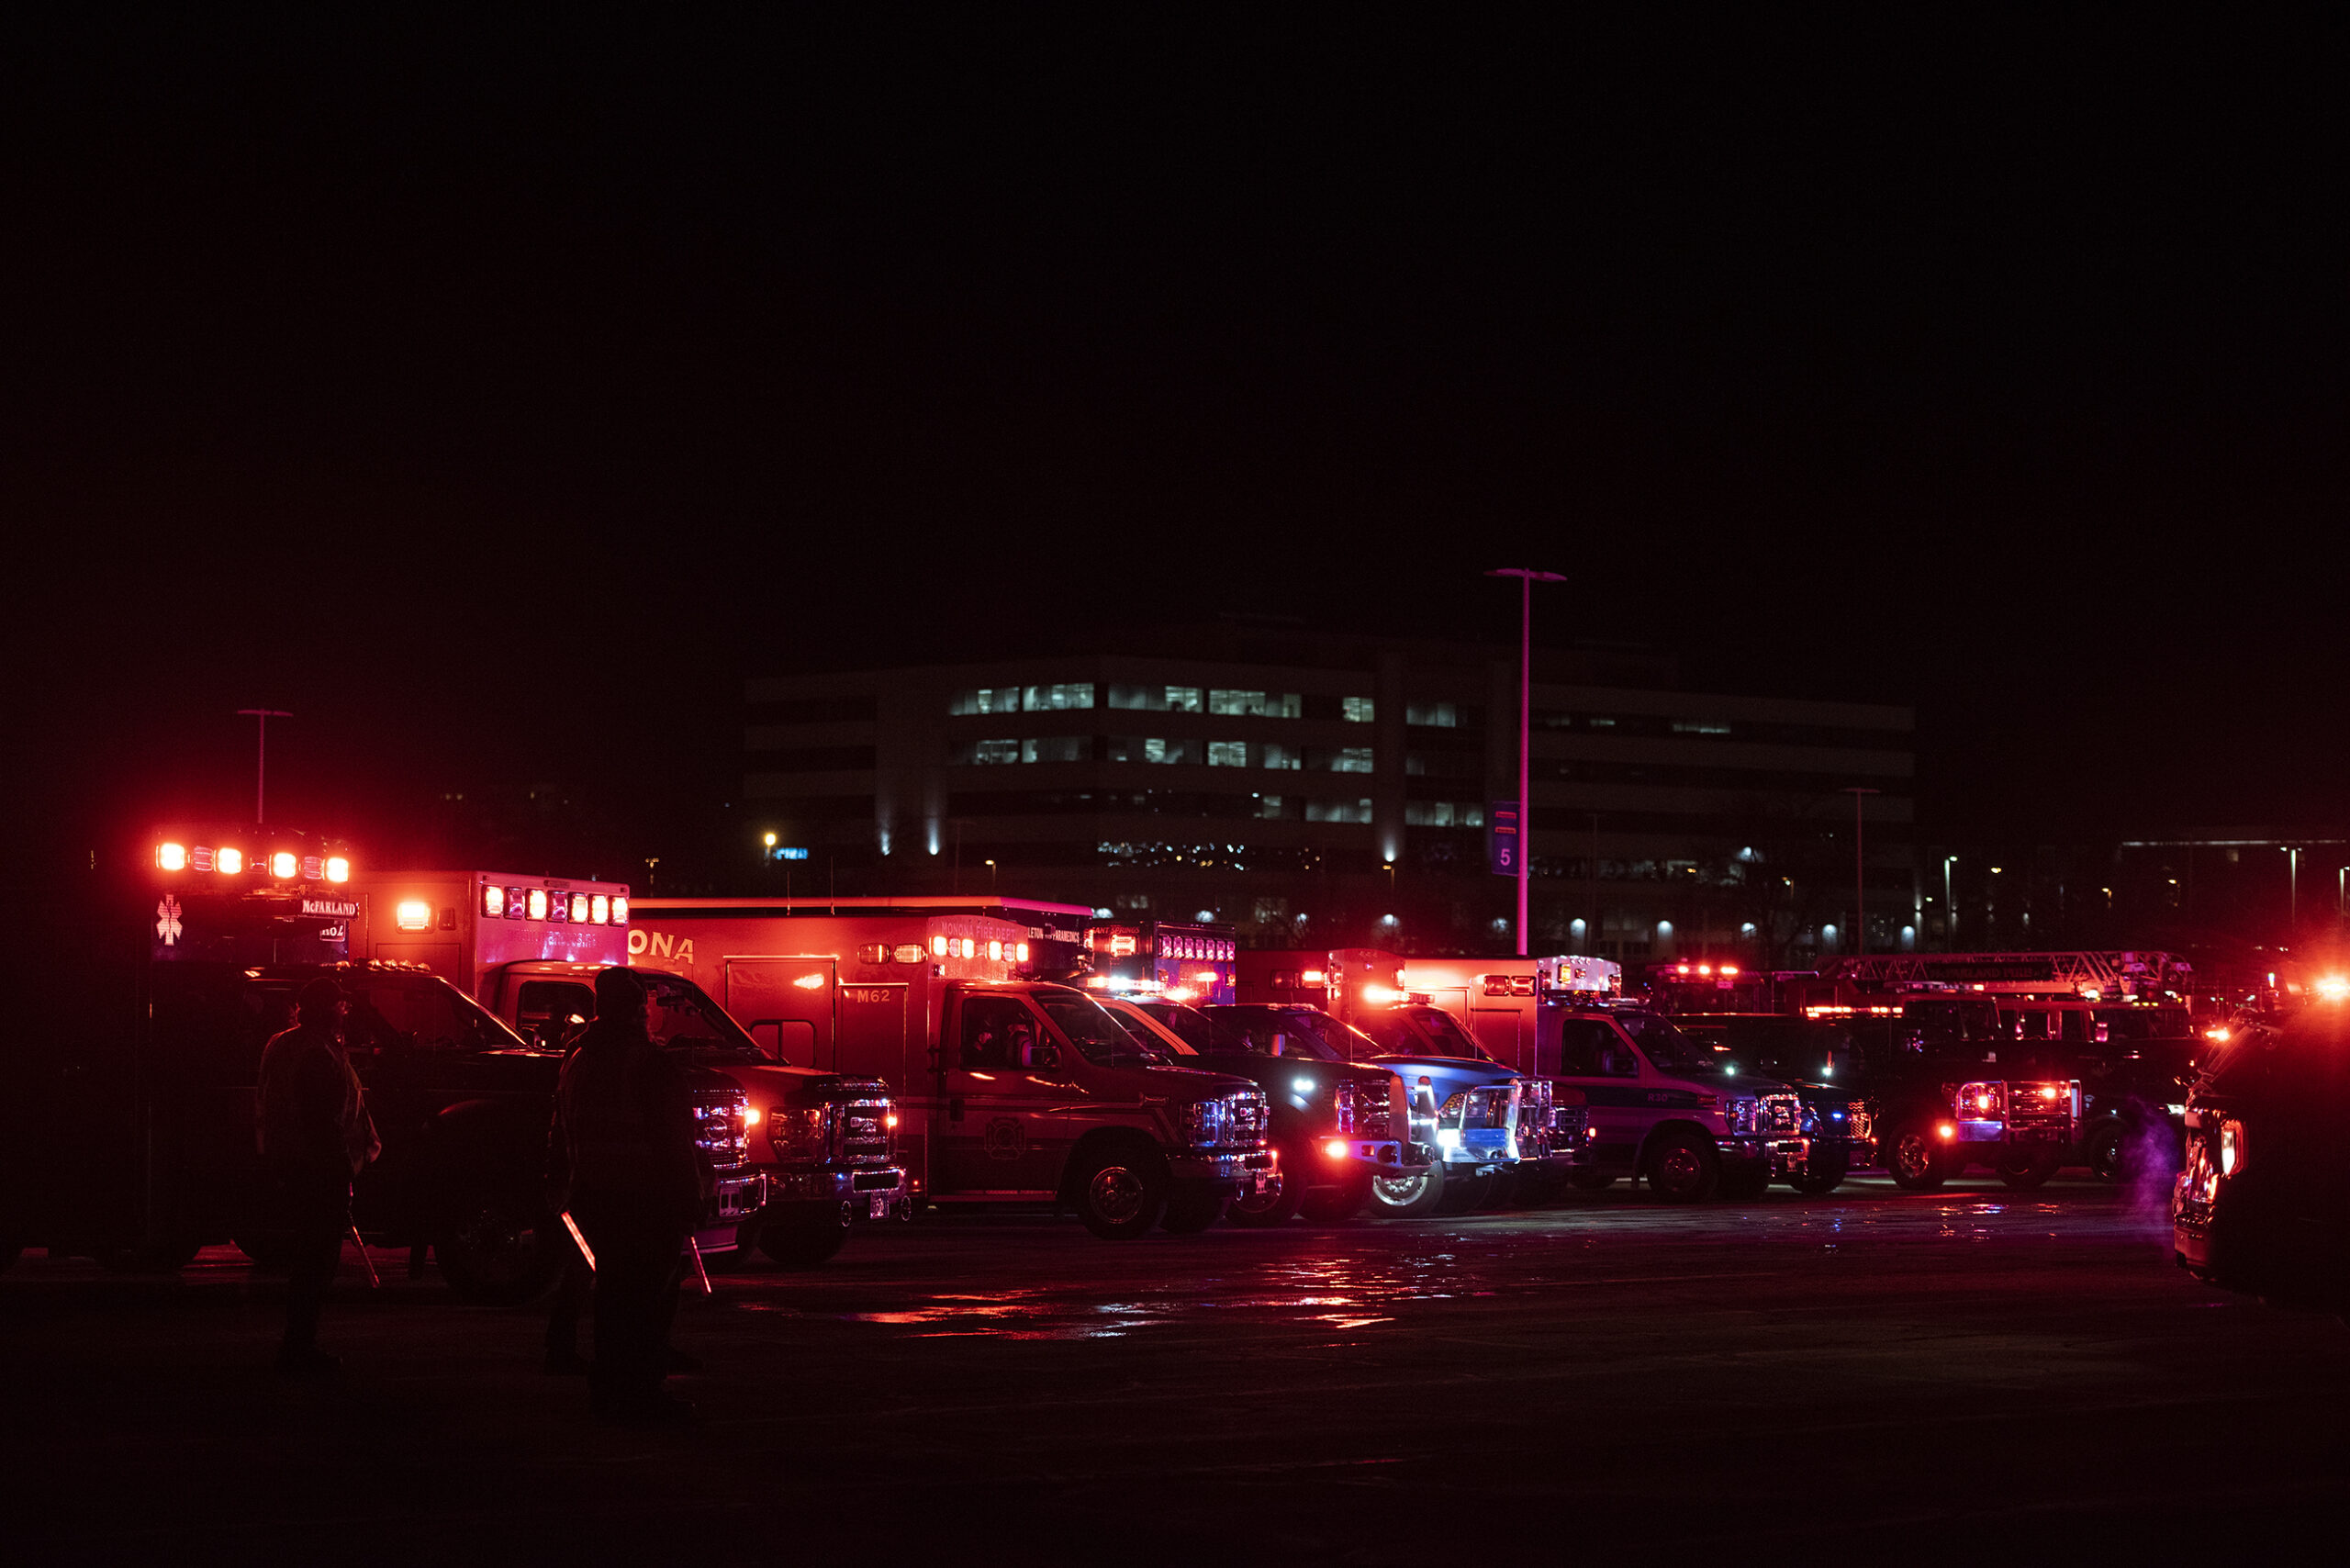 Several lights from emergency vehicles fill the dark night sky with red light.